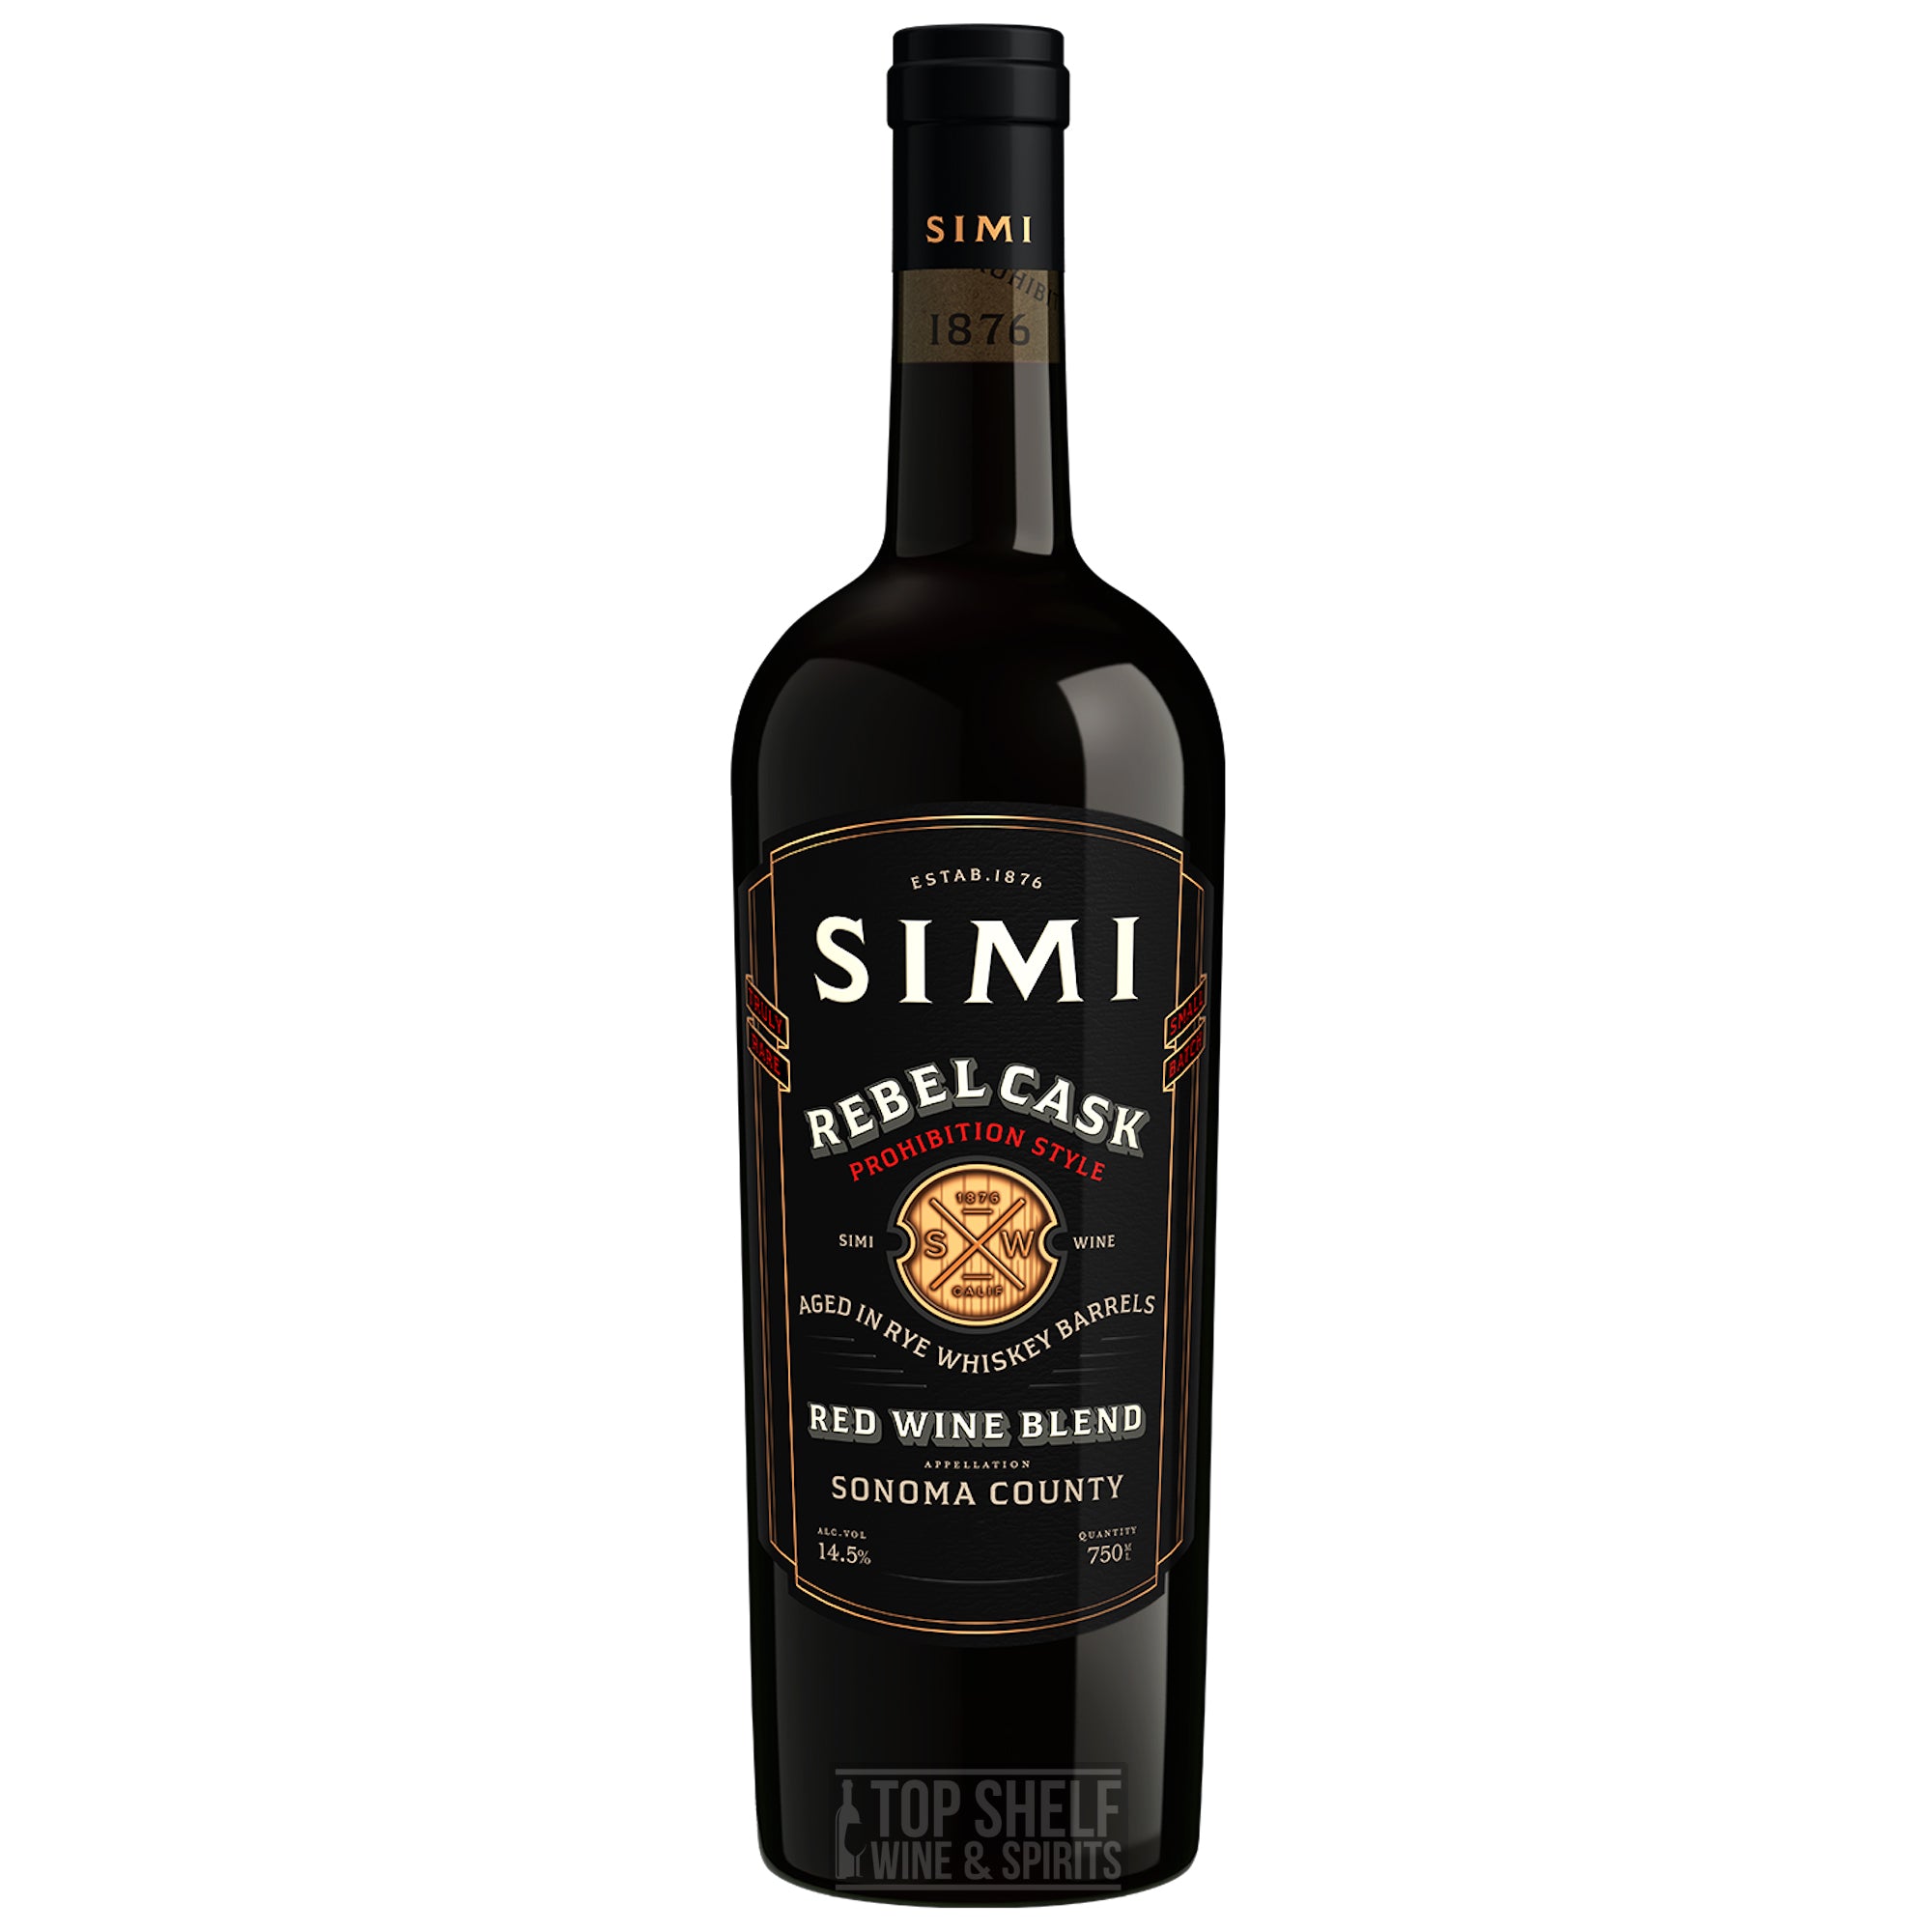 Simi Winery Sonoma County Rebel Cask Red Wine Blend